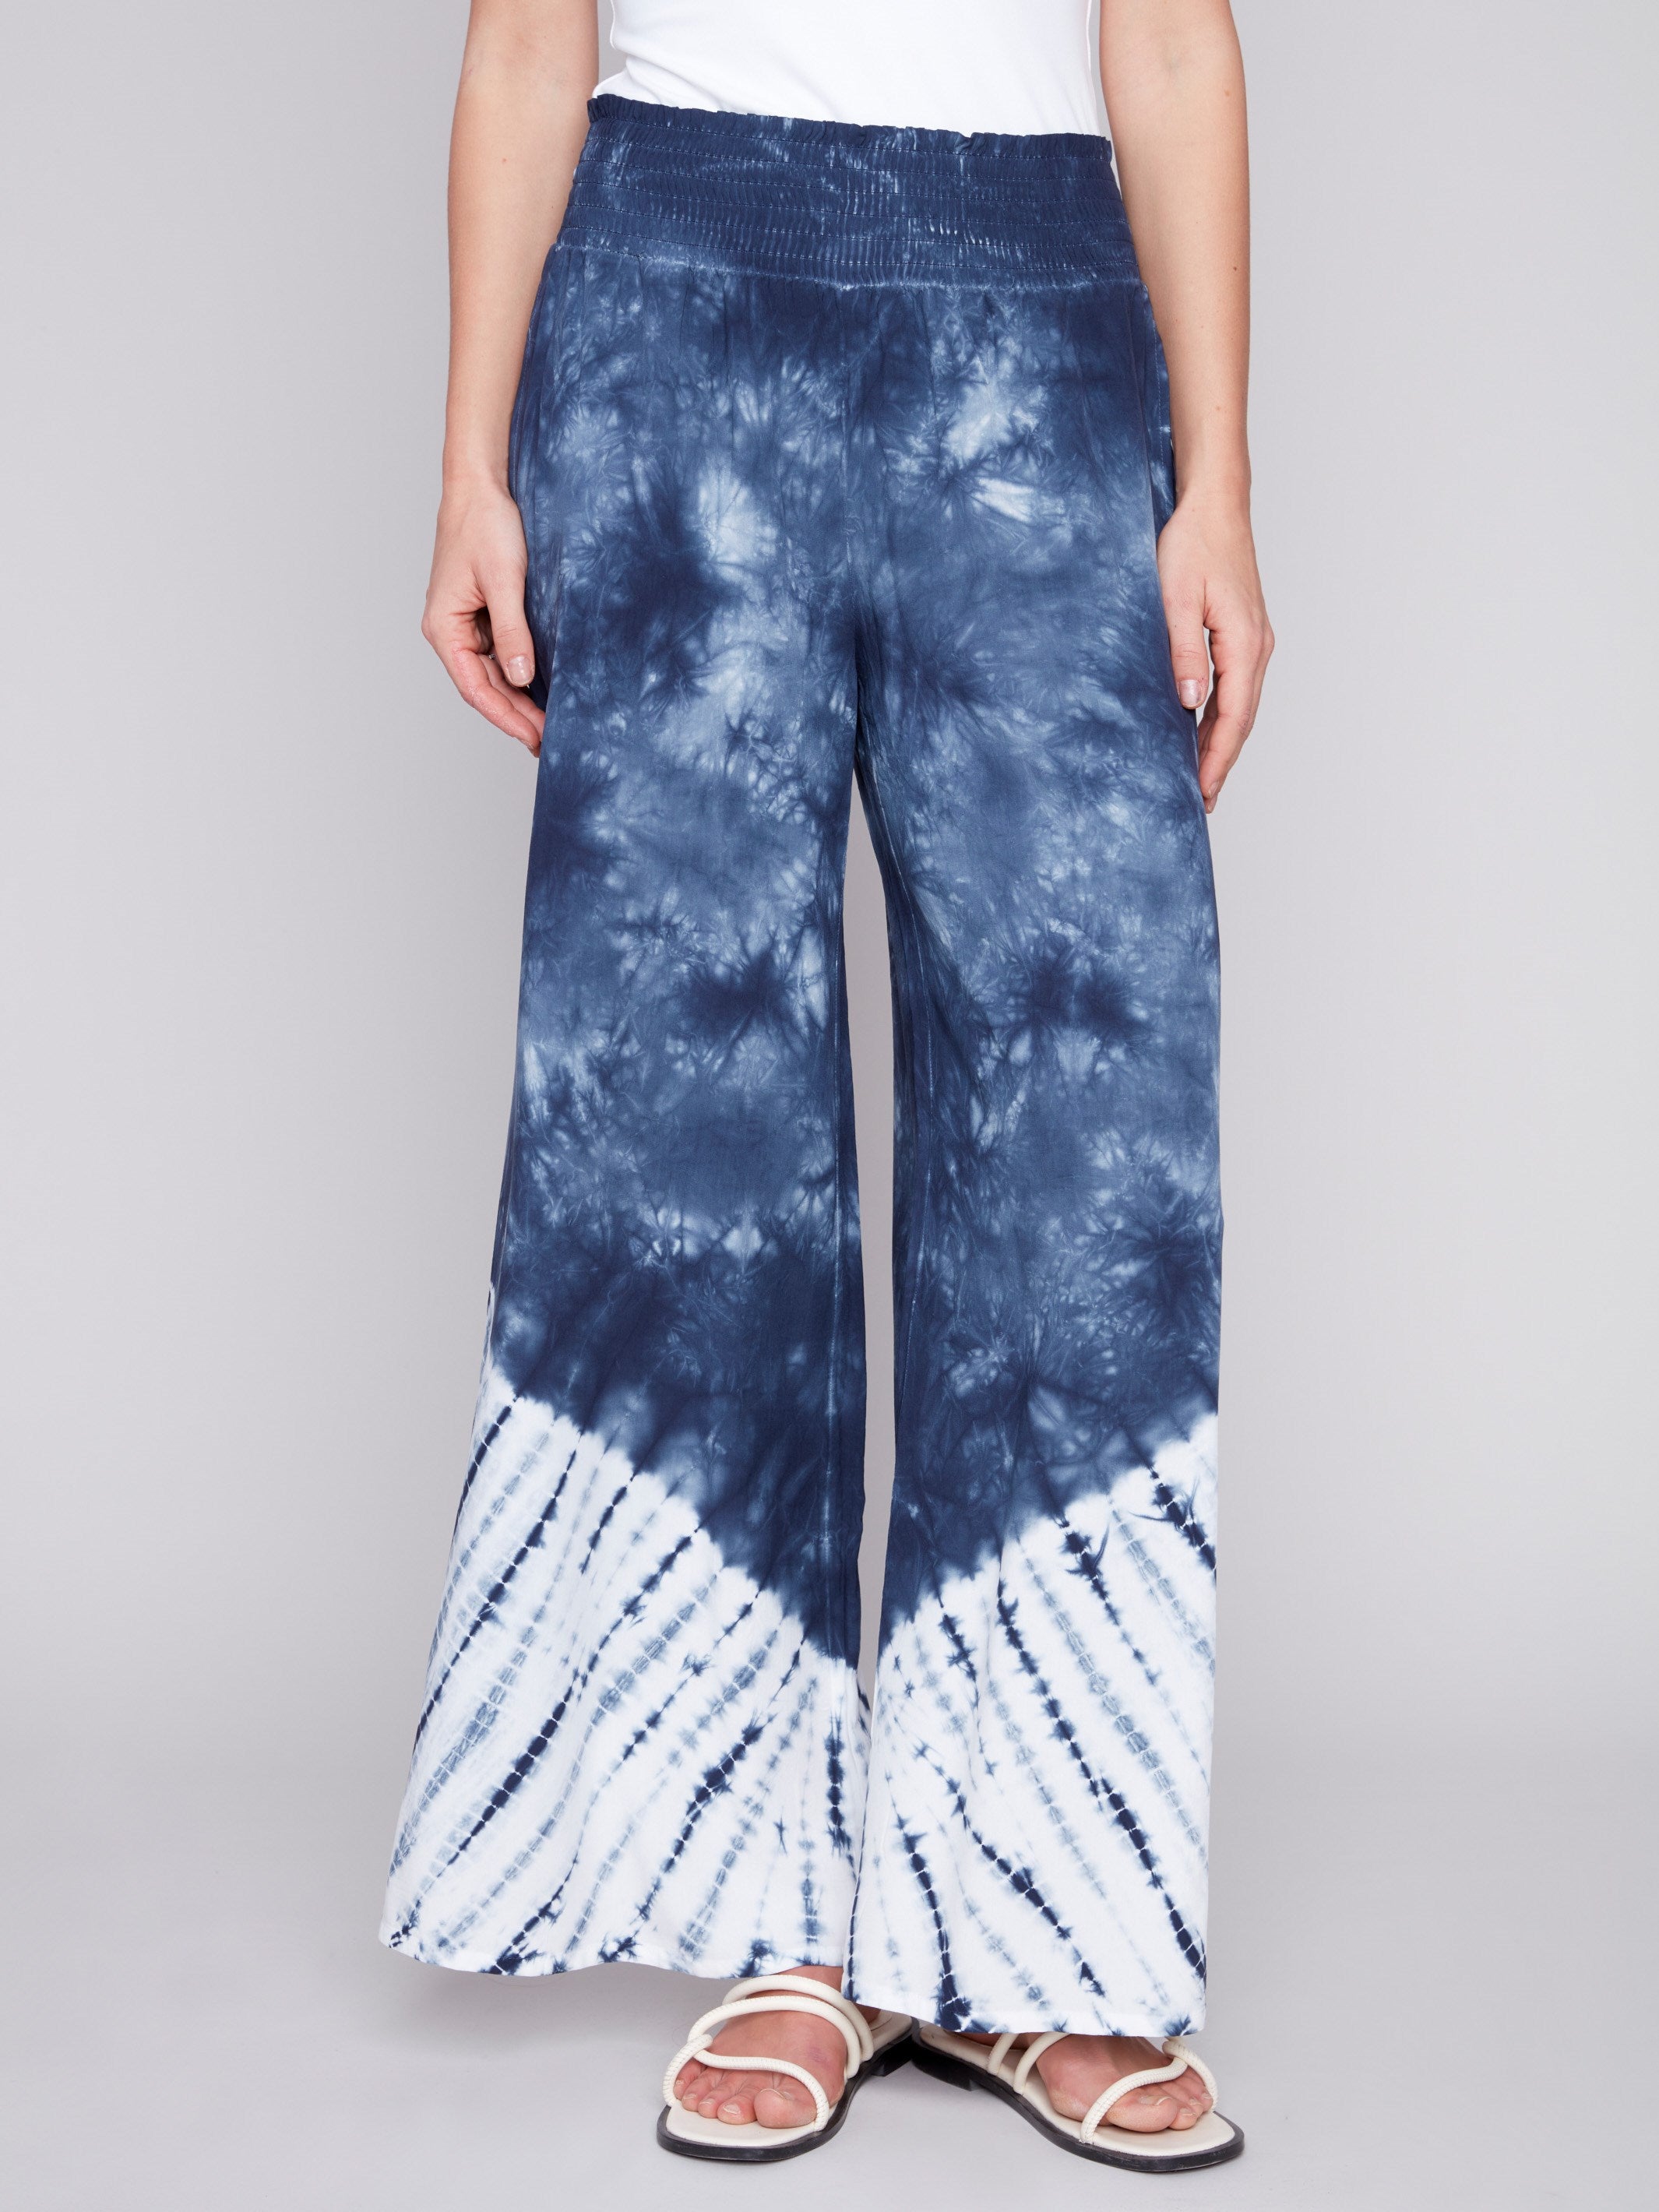 Printed Flowy Palazzo Pants - Navy - Charlie B Collection Canada - Image 2